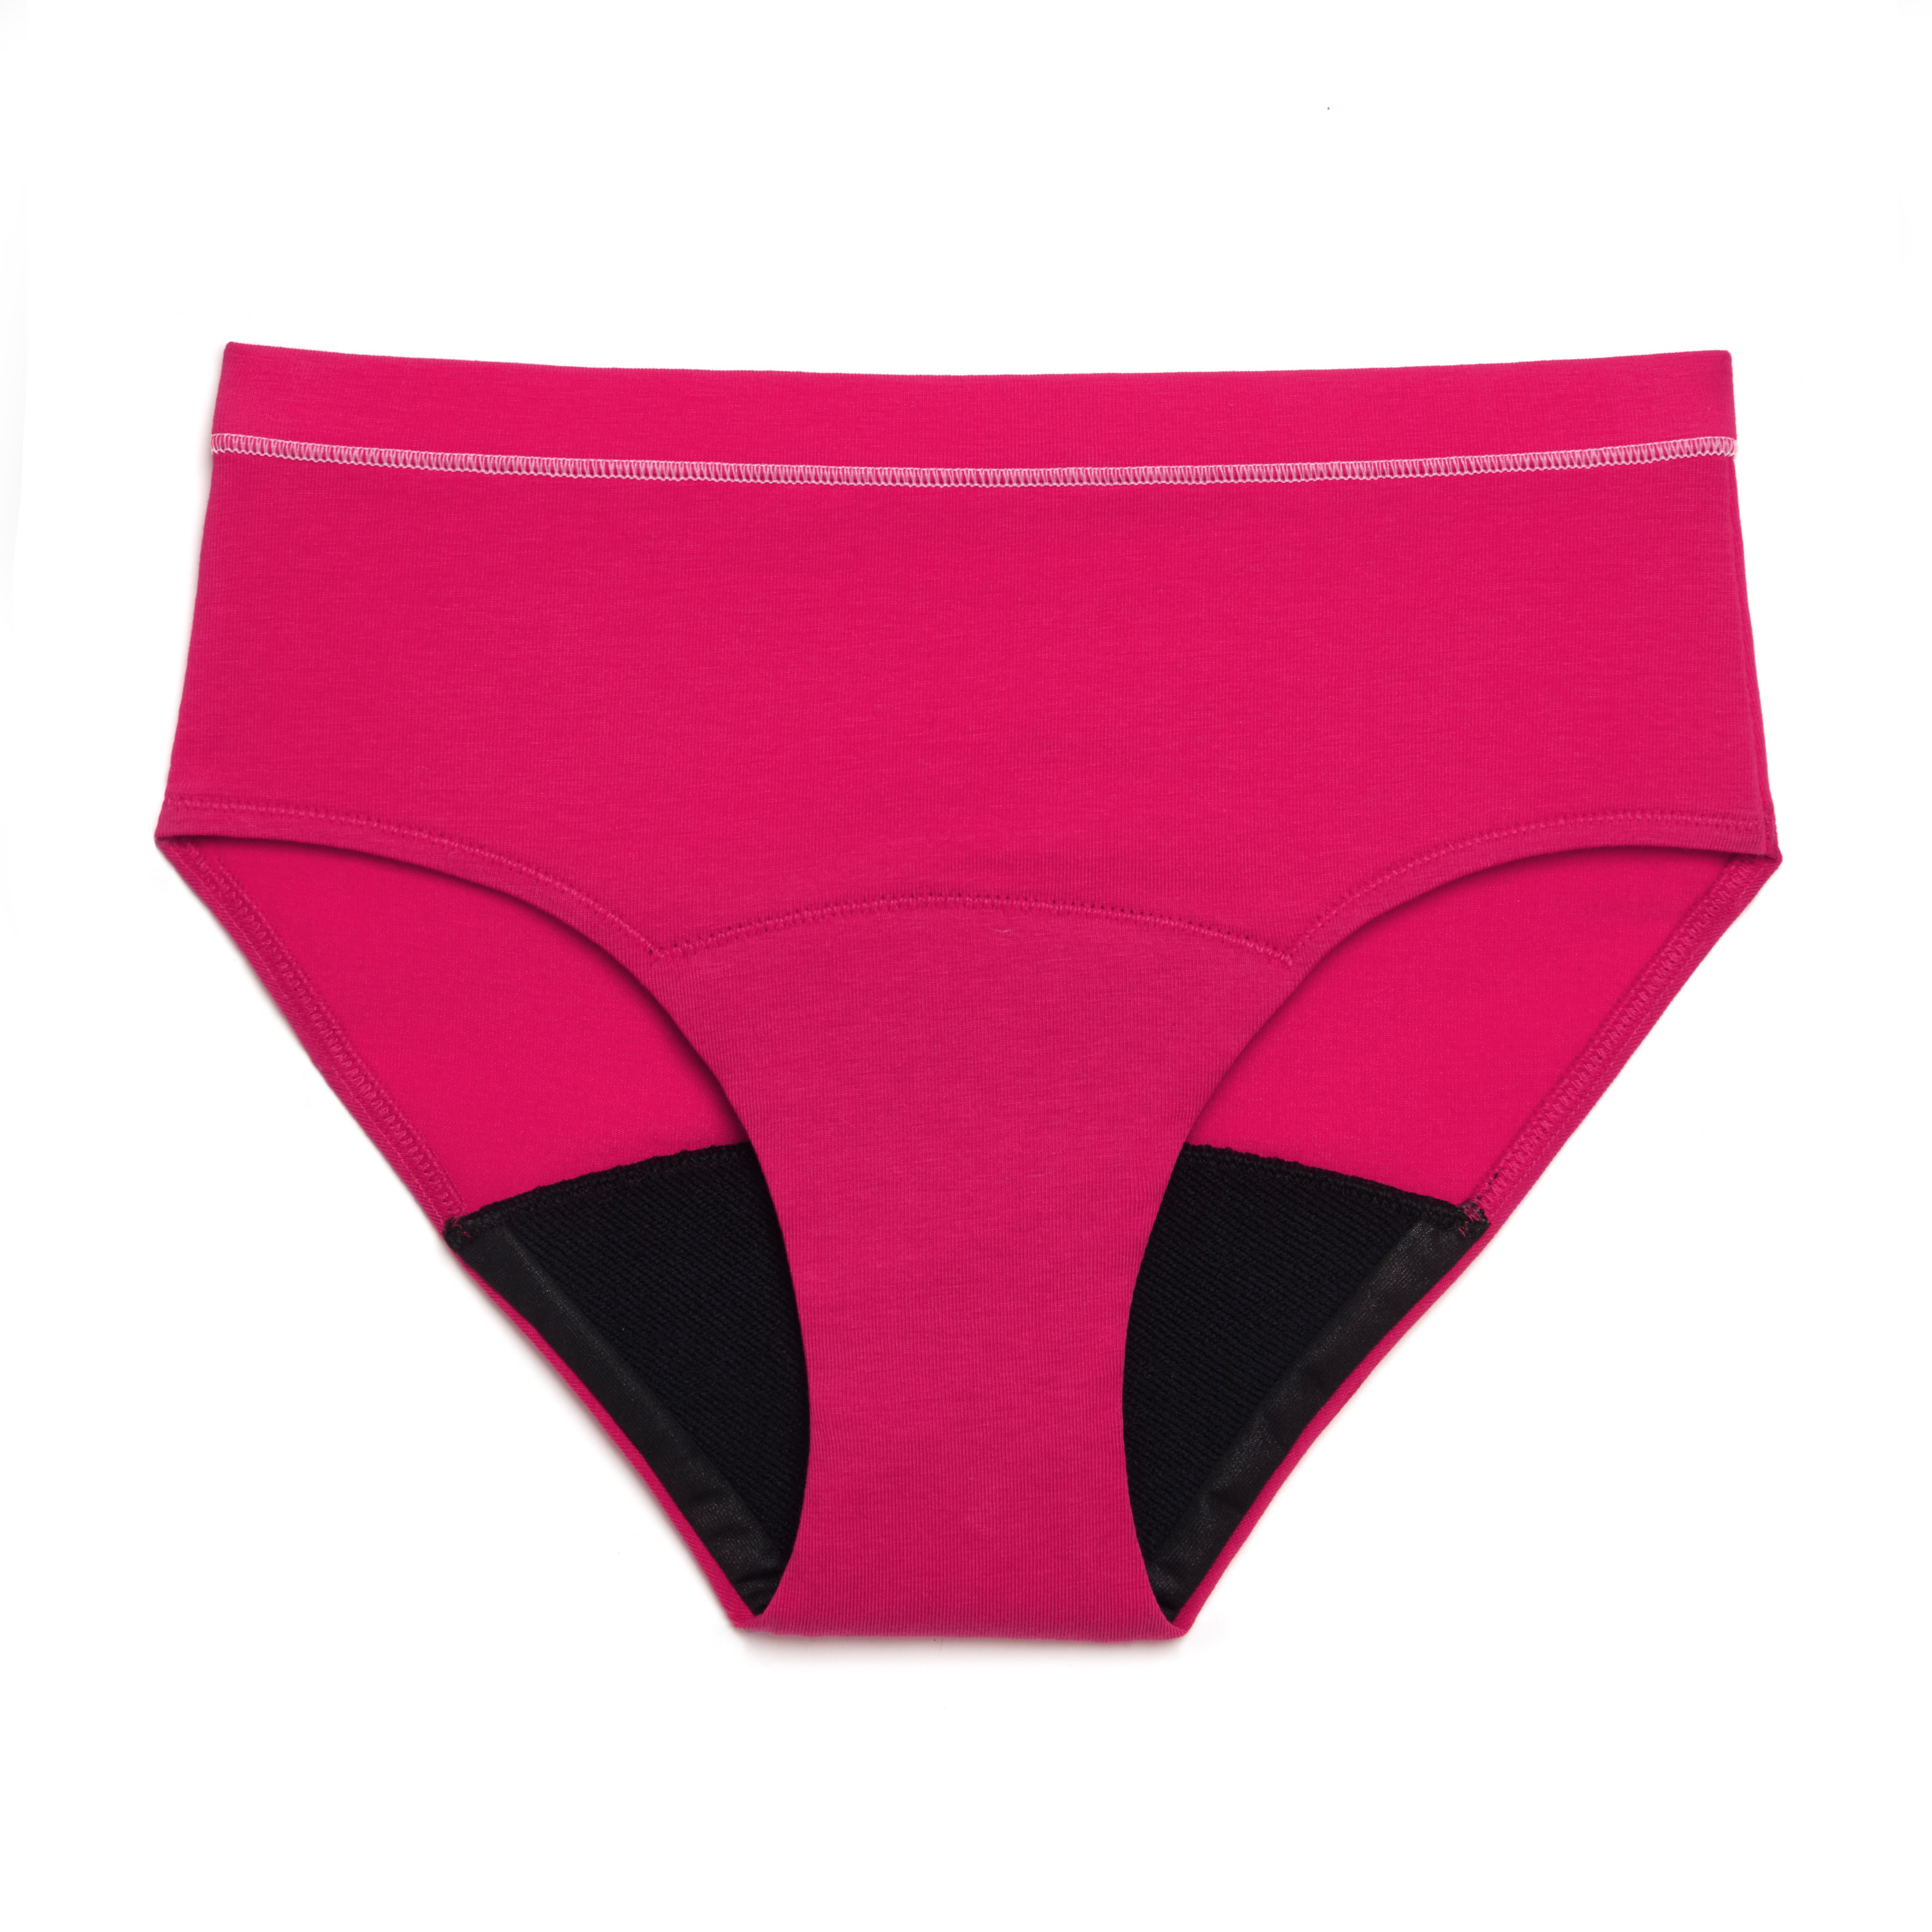 Thinx Teens - All Day Brief - Hot Pink - CollectionFront